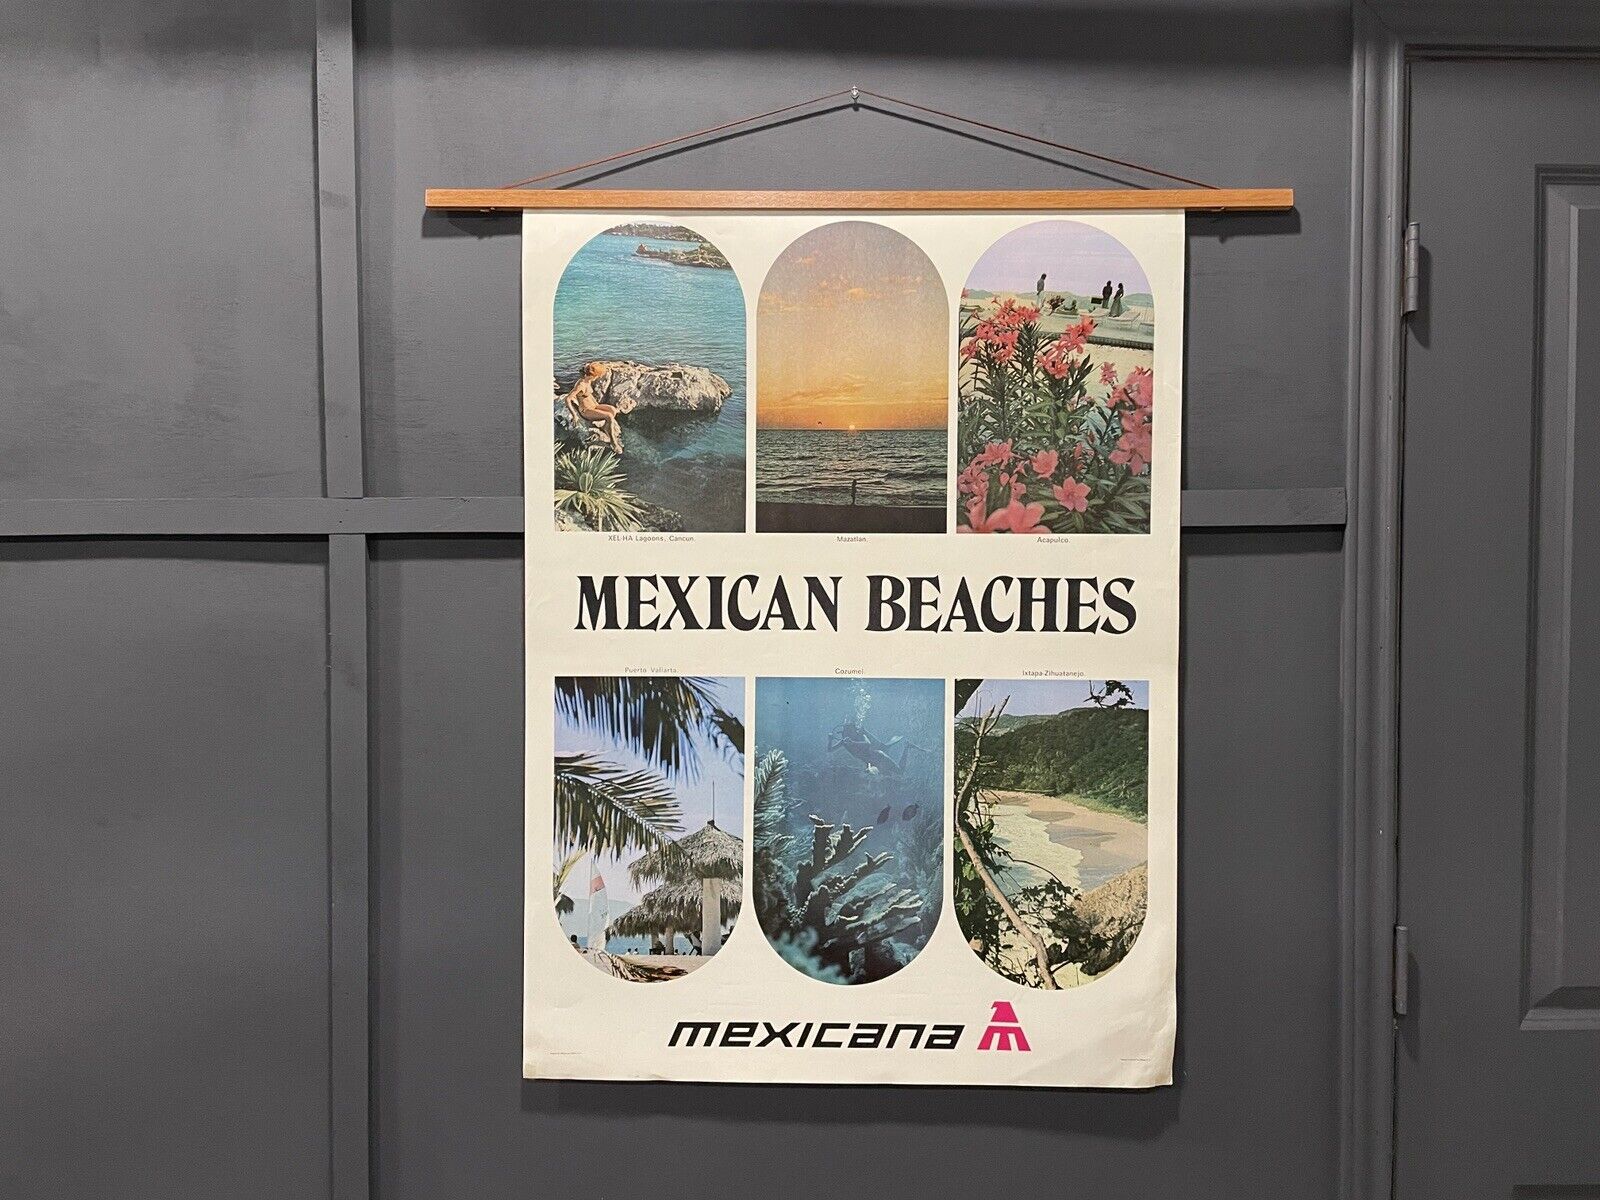 MEXICANA AIRLINES Mexican Beaches 1970s Vintage Travel Poster Art 28x37